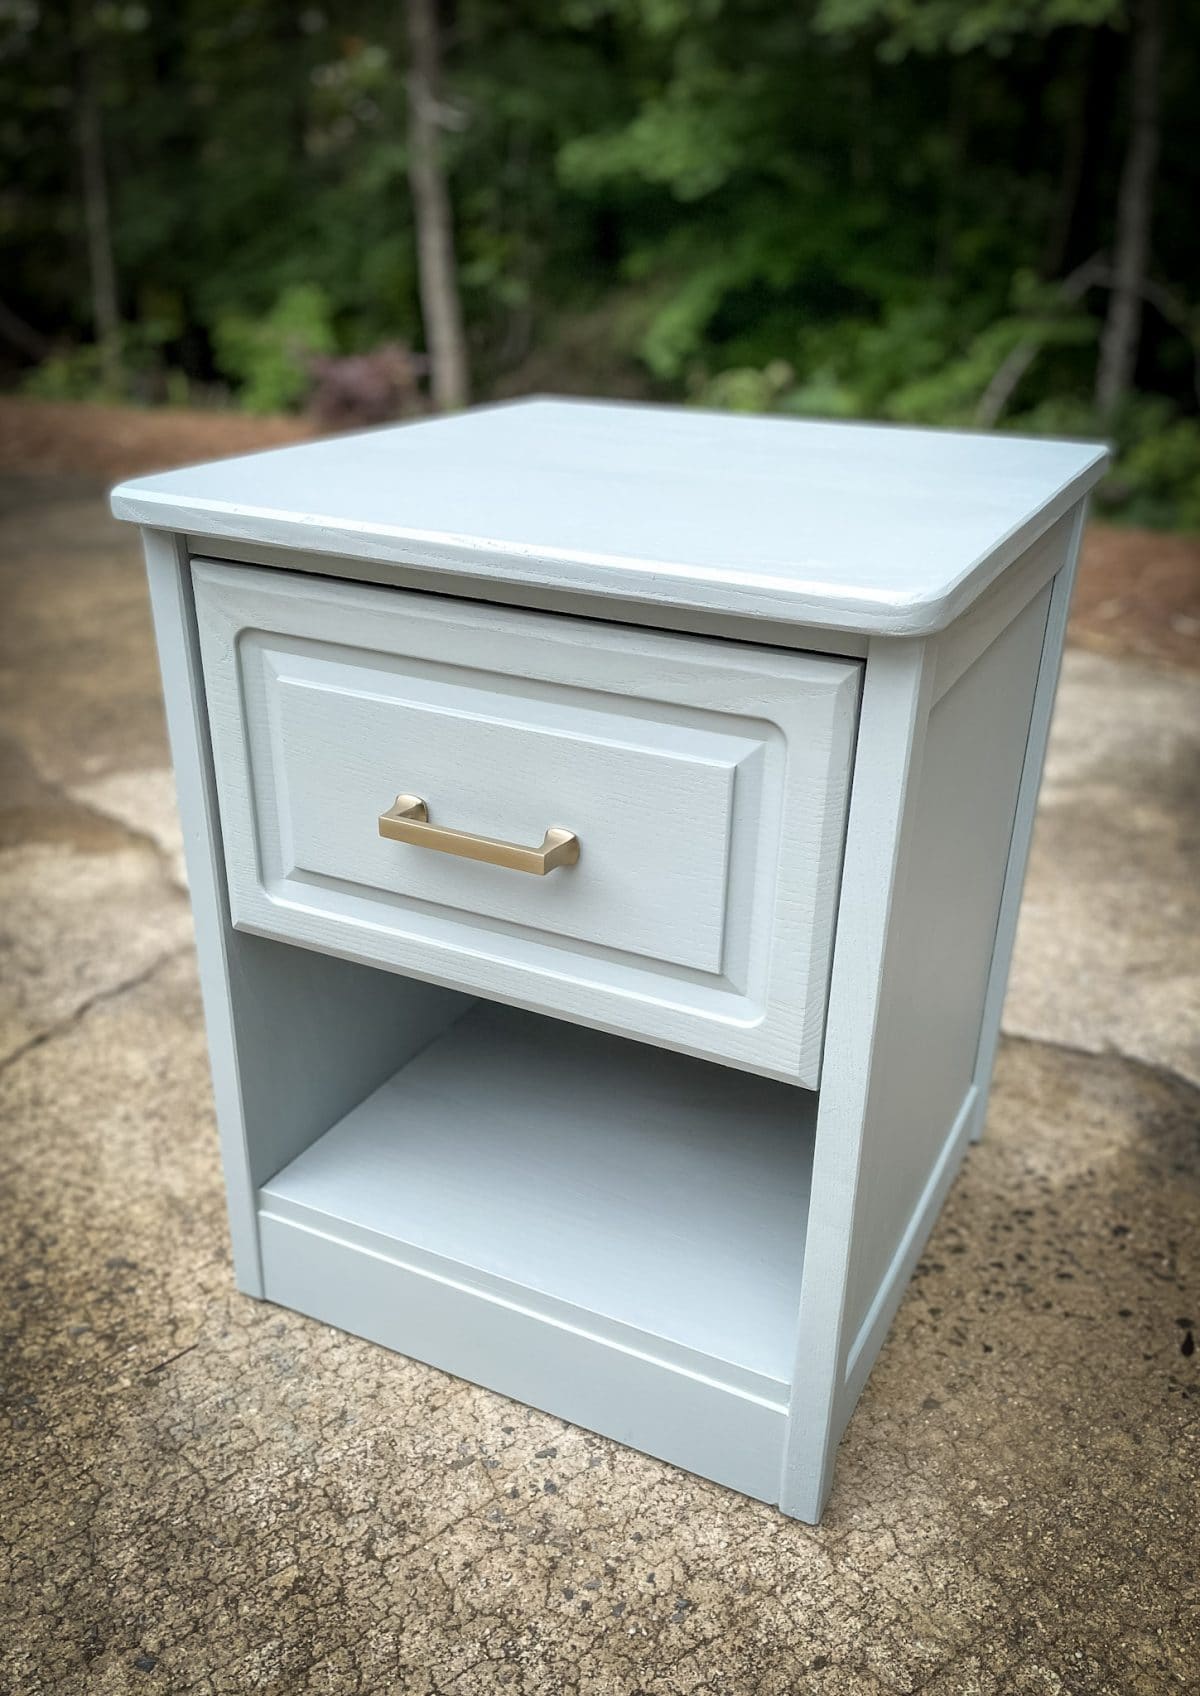 finished nightstand sitting outside